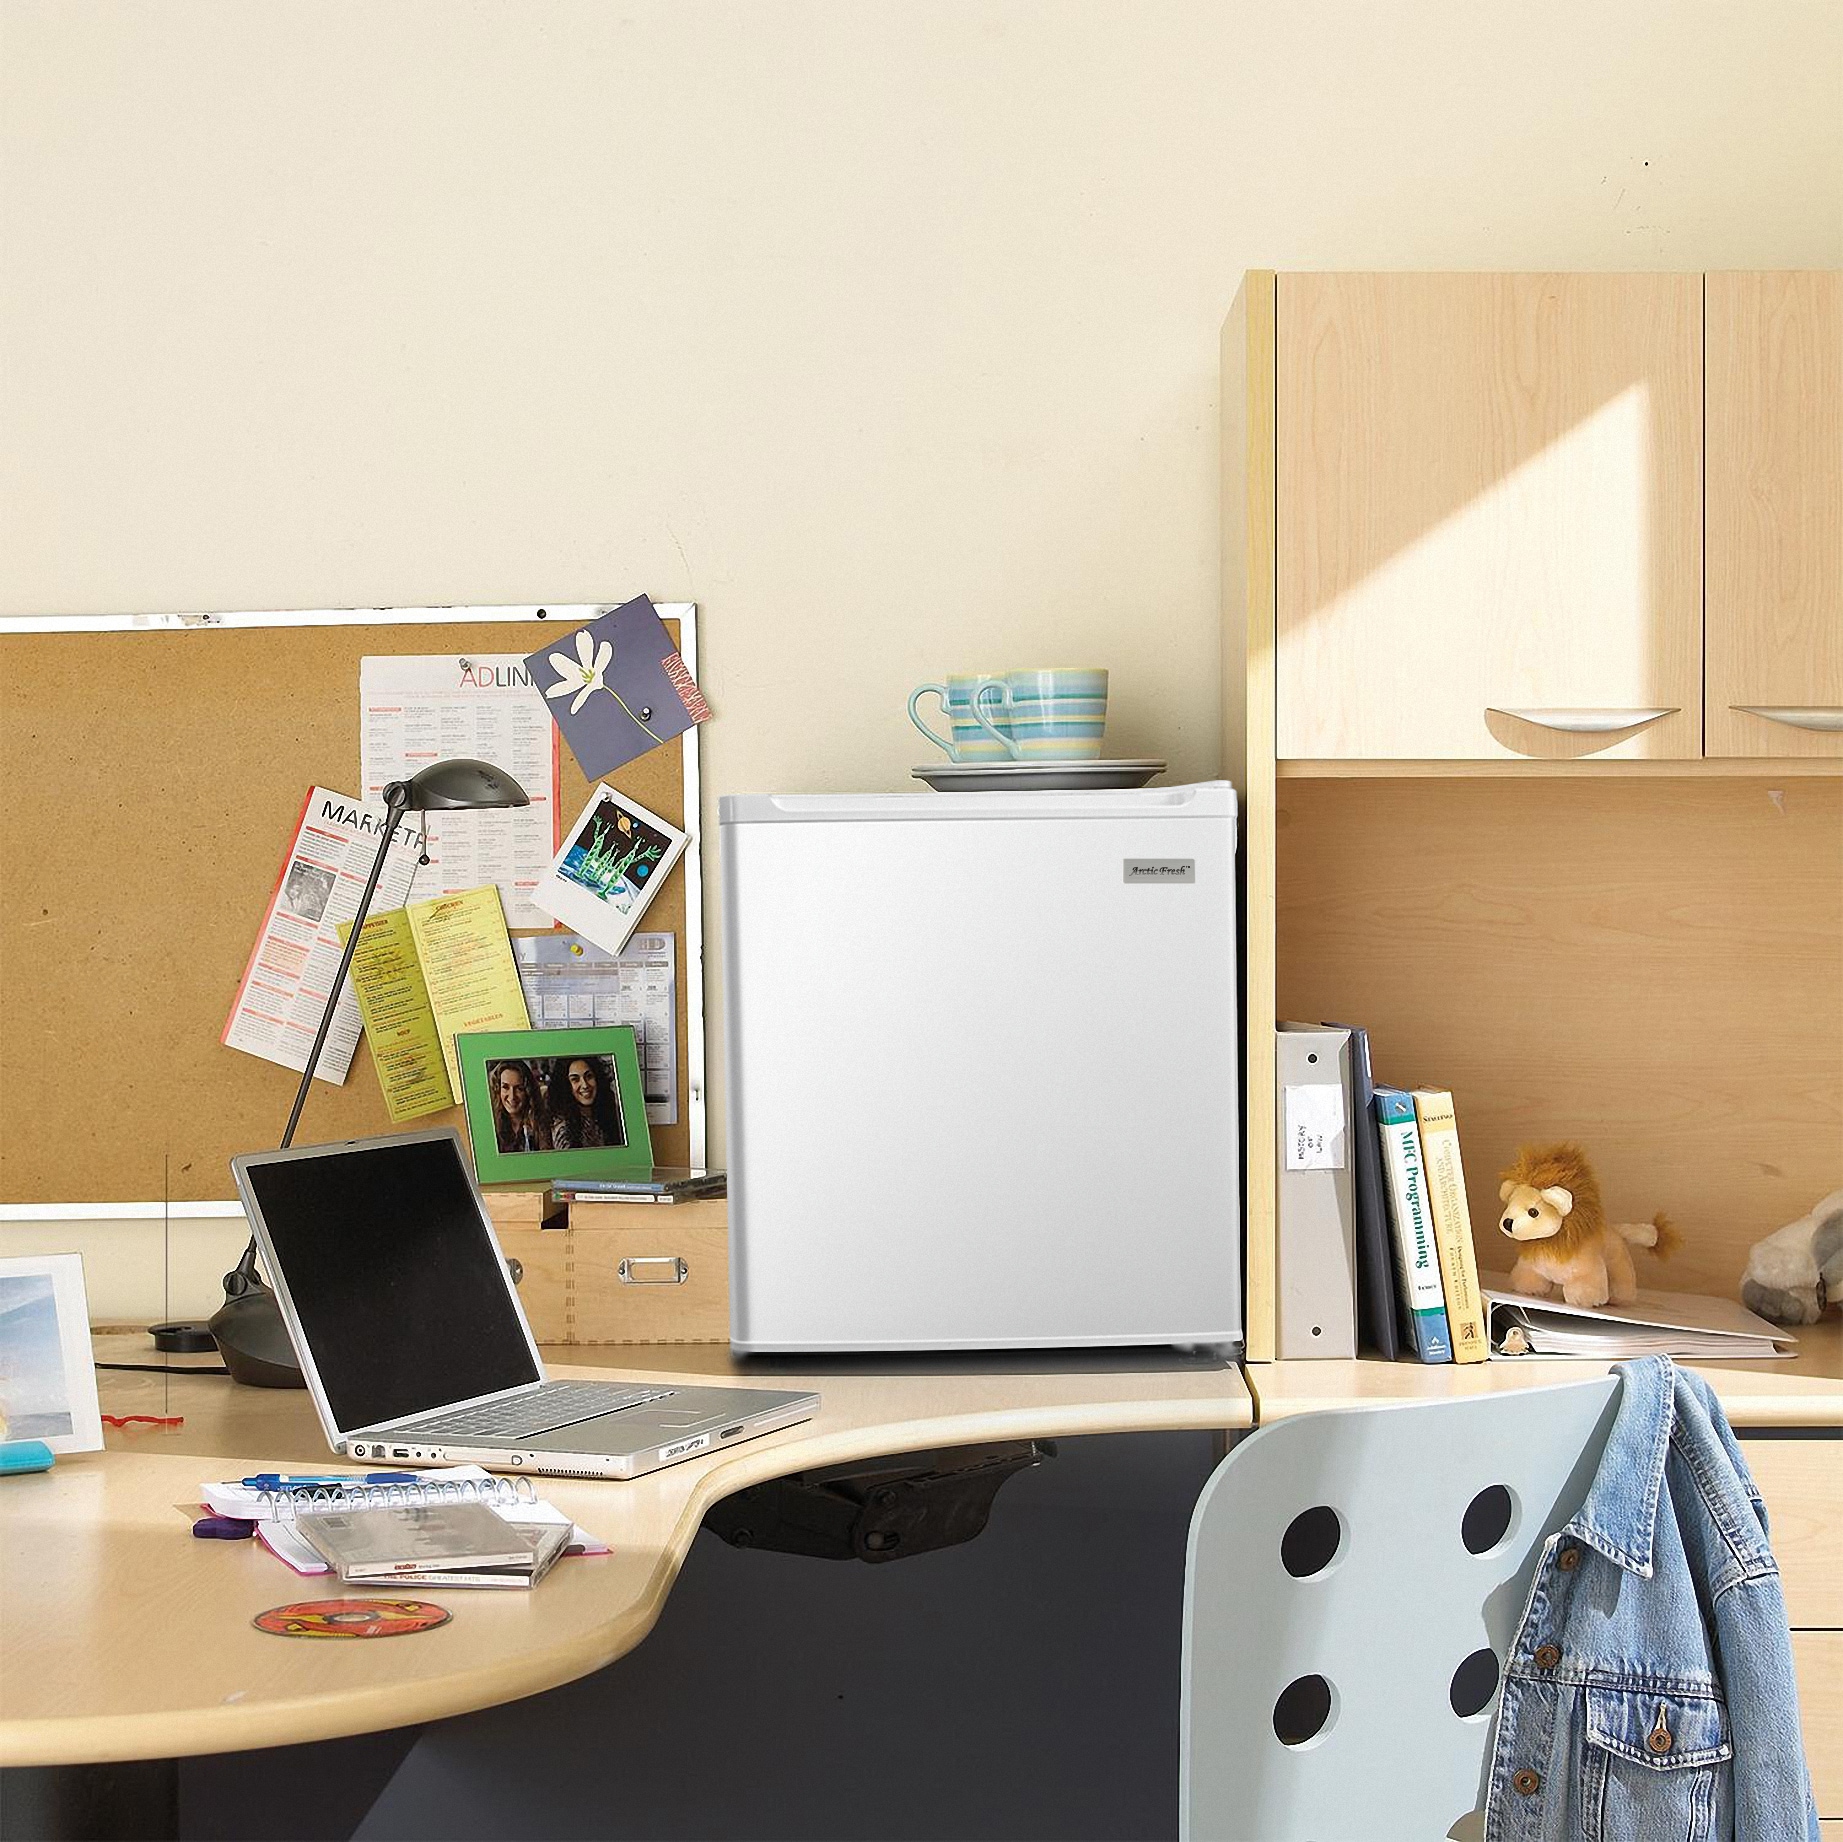 Buy a Mini Fridge and Turn Your Office Cubicle Into an Oasis